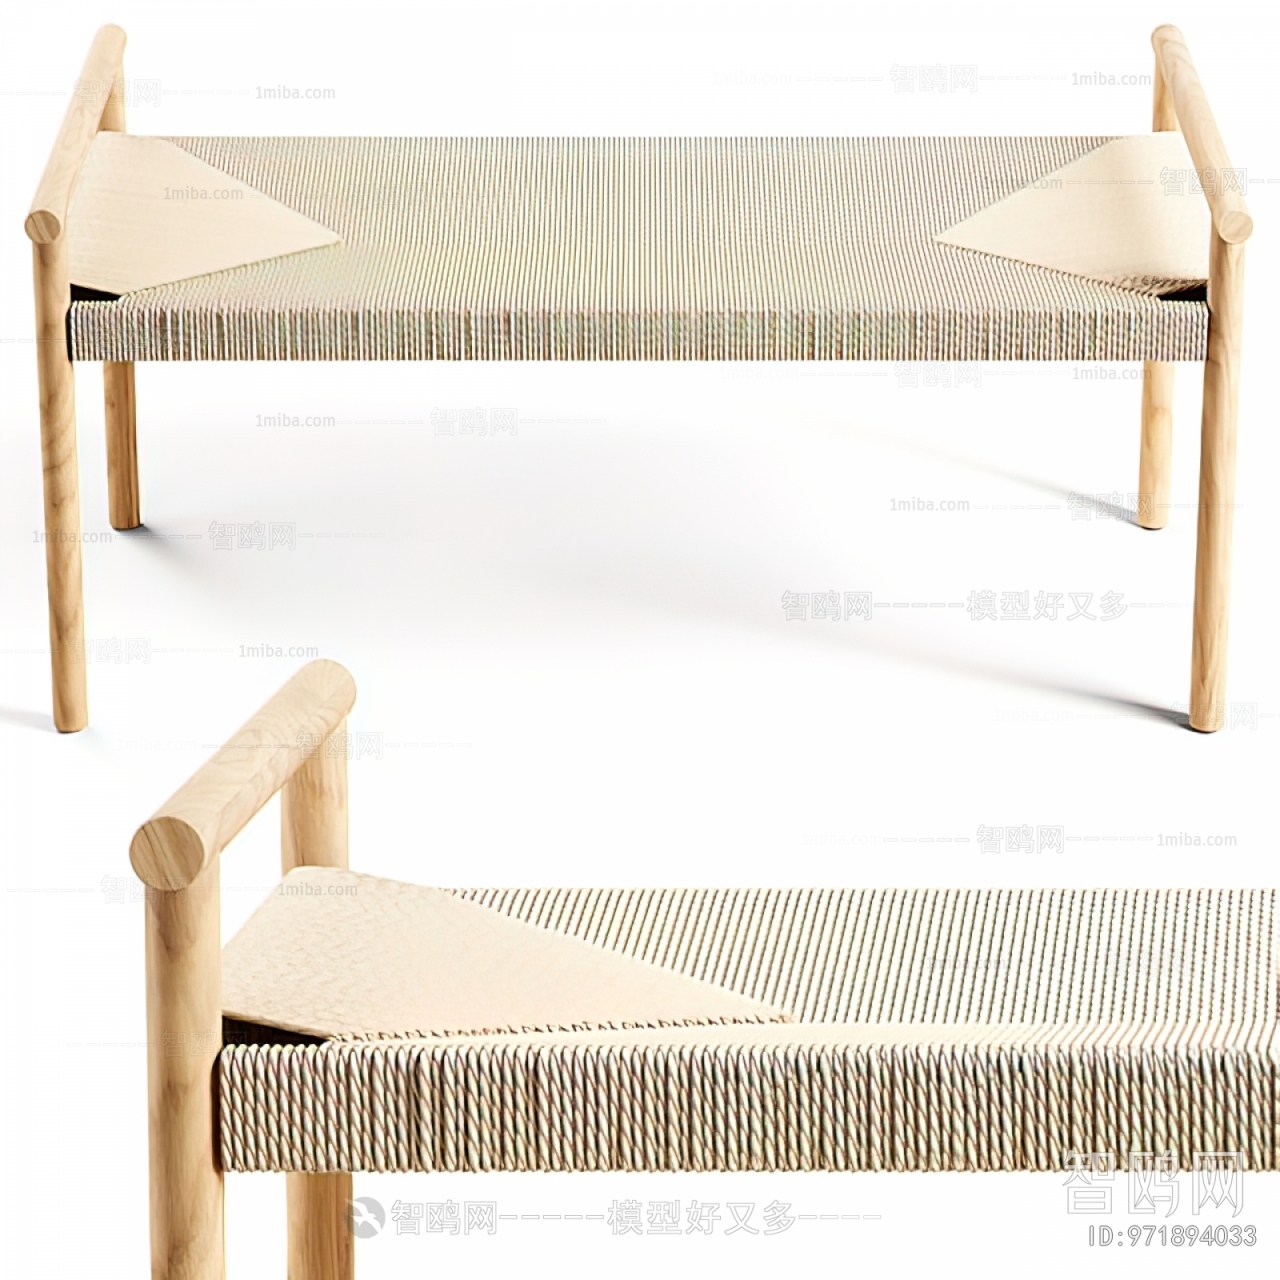 Nordic Style Bench